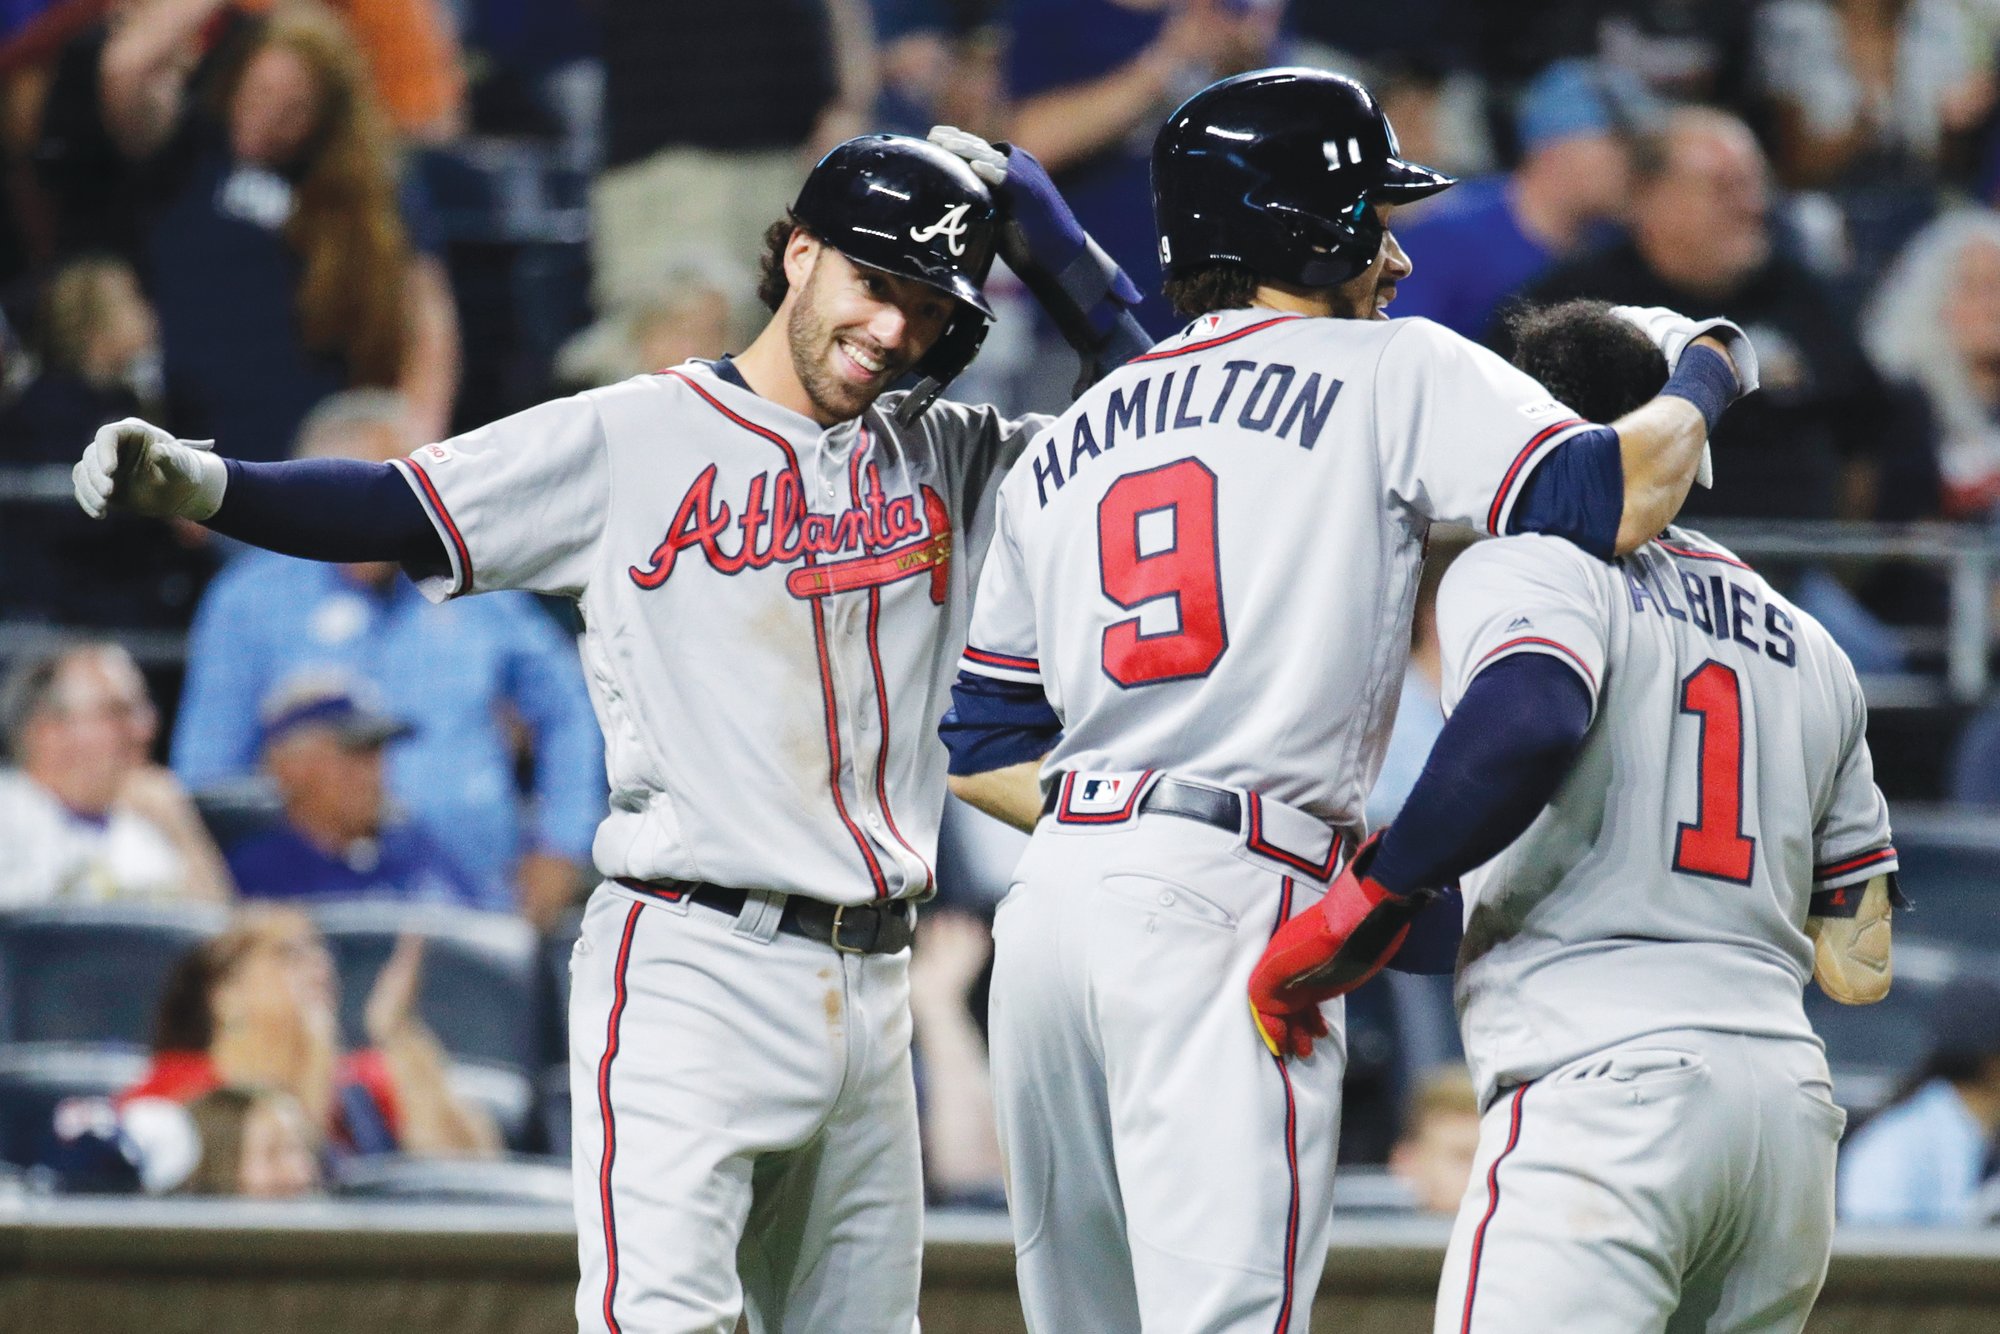 Markakis retires after 15 years with Braves, Orioles - The Sumter Item